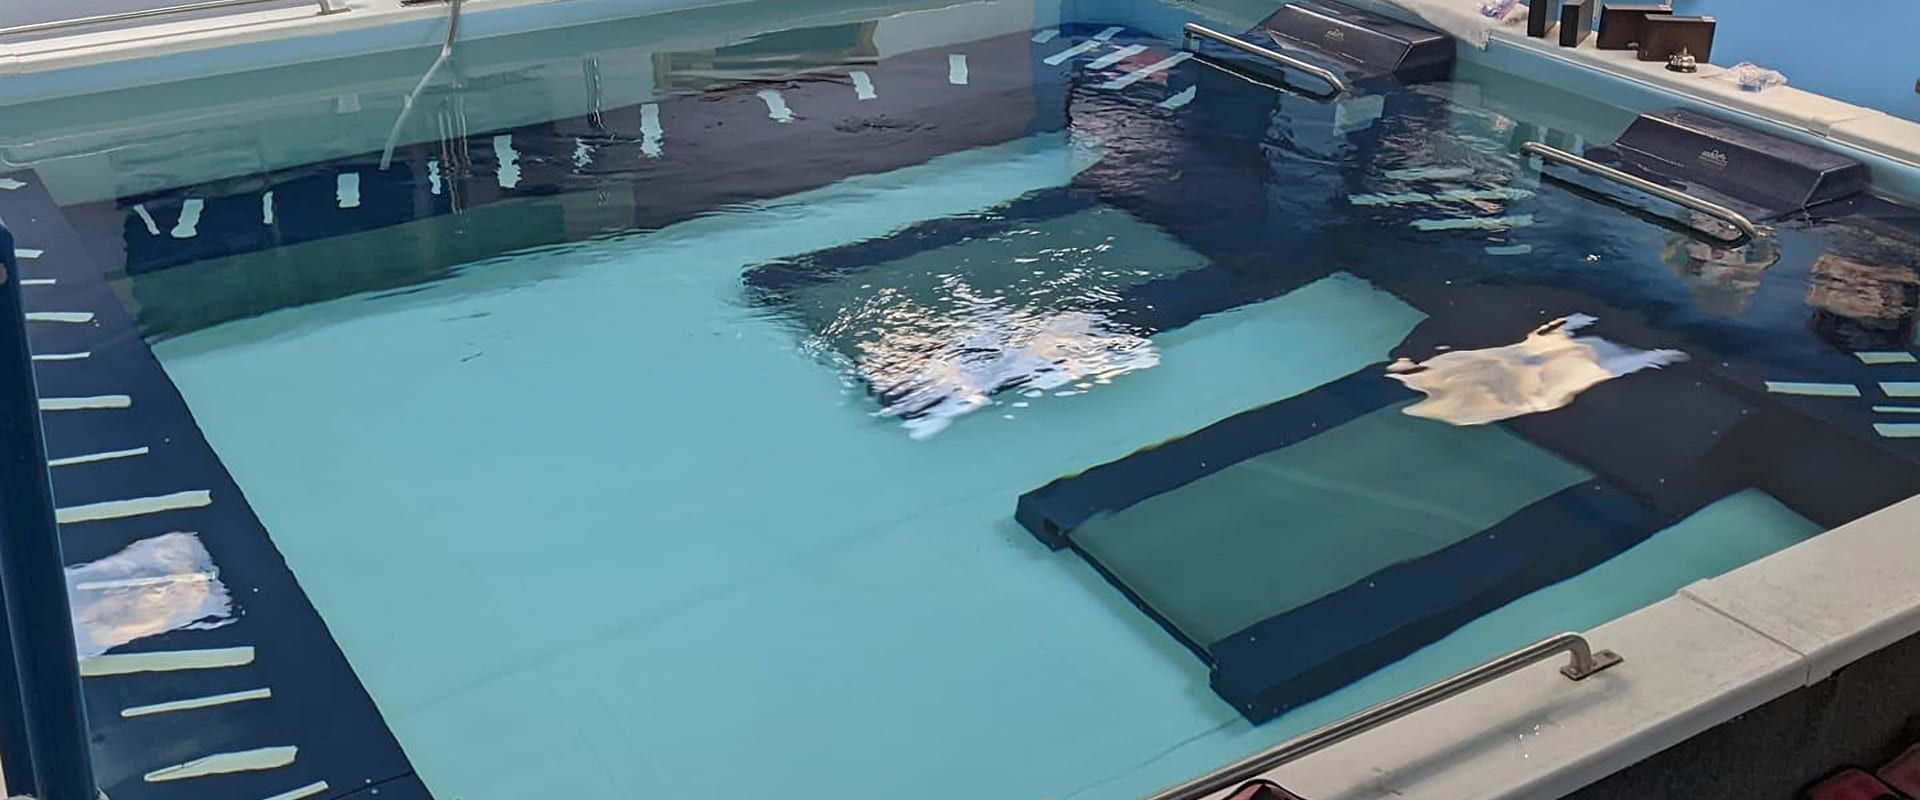 Our therapy pool featuring in-pool treadmills